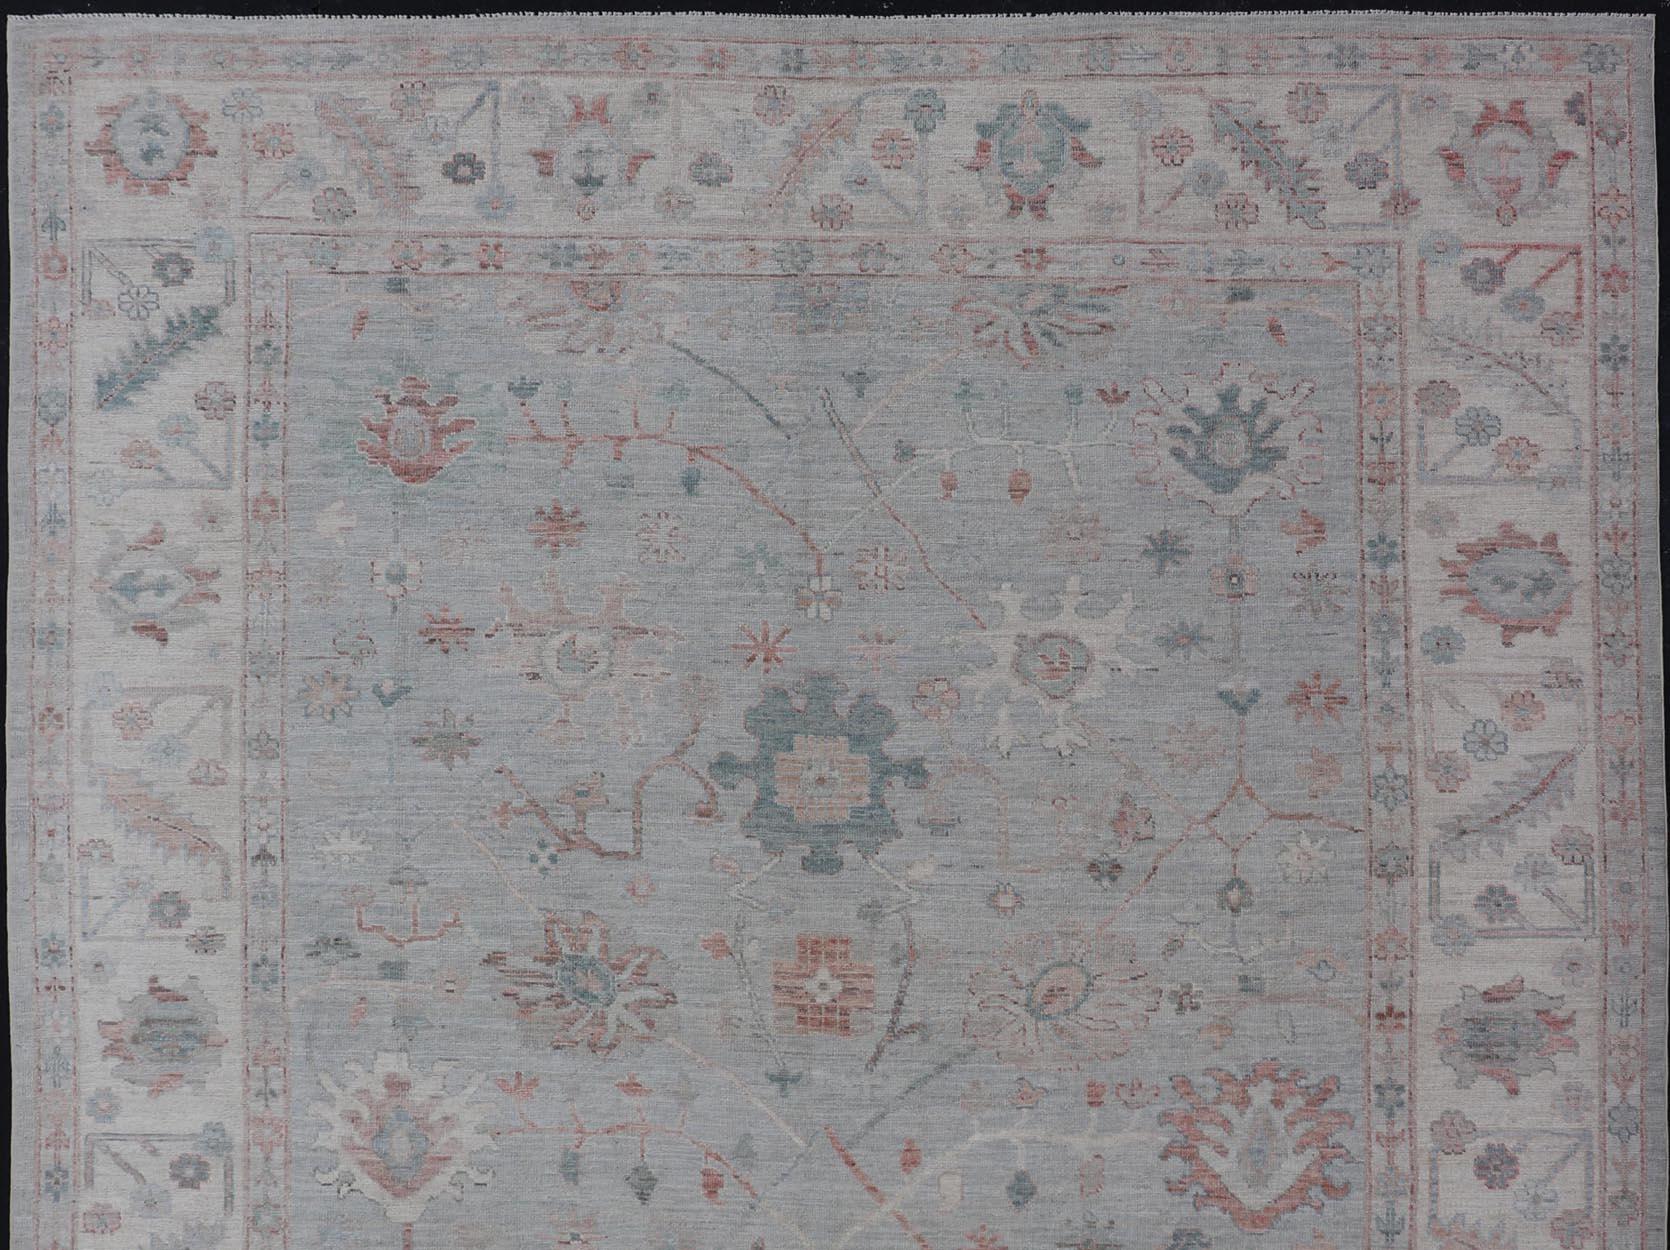 Modern Tribal oushak with muted background in wool with all-over design Keivan Woven Arts; rug AWR-9008 Country of origin: Afghanistan Type: Oushak Design: All-Over, Floral,

Measures: 8'11 x 11'9 

This hand-knotted Oushak has a very classic